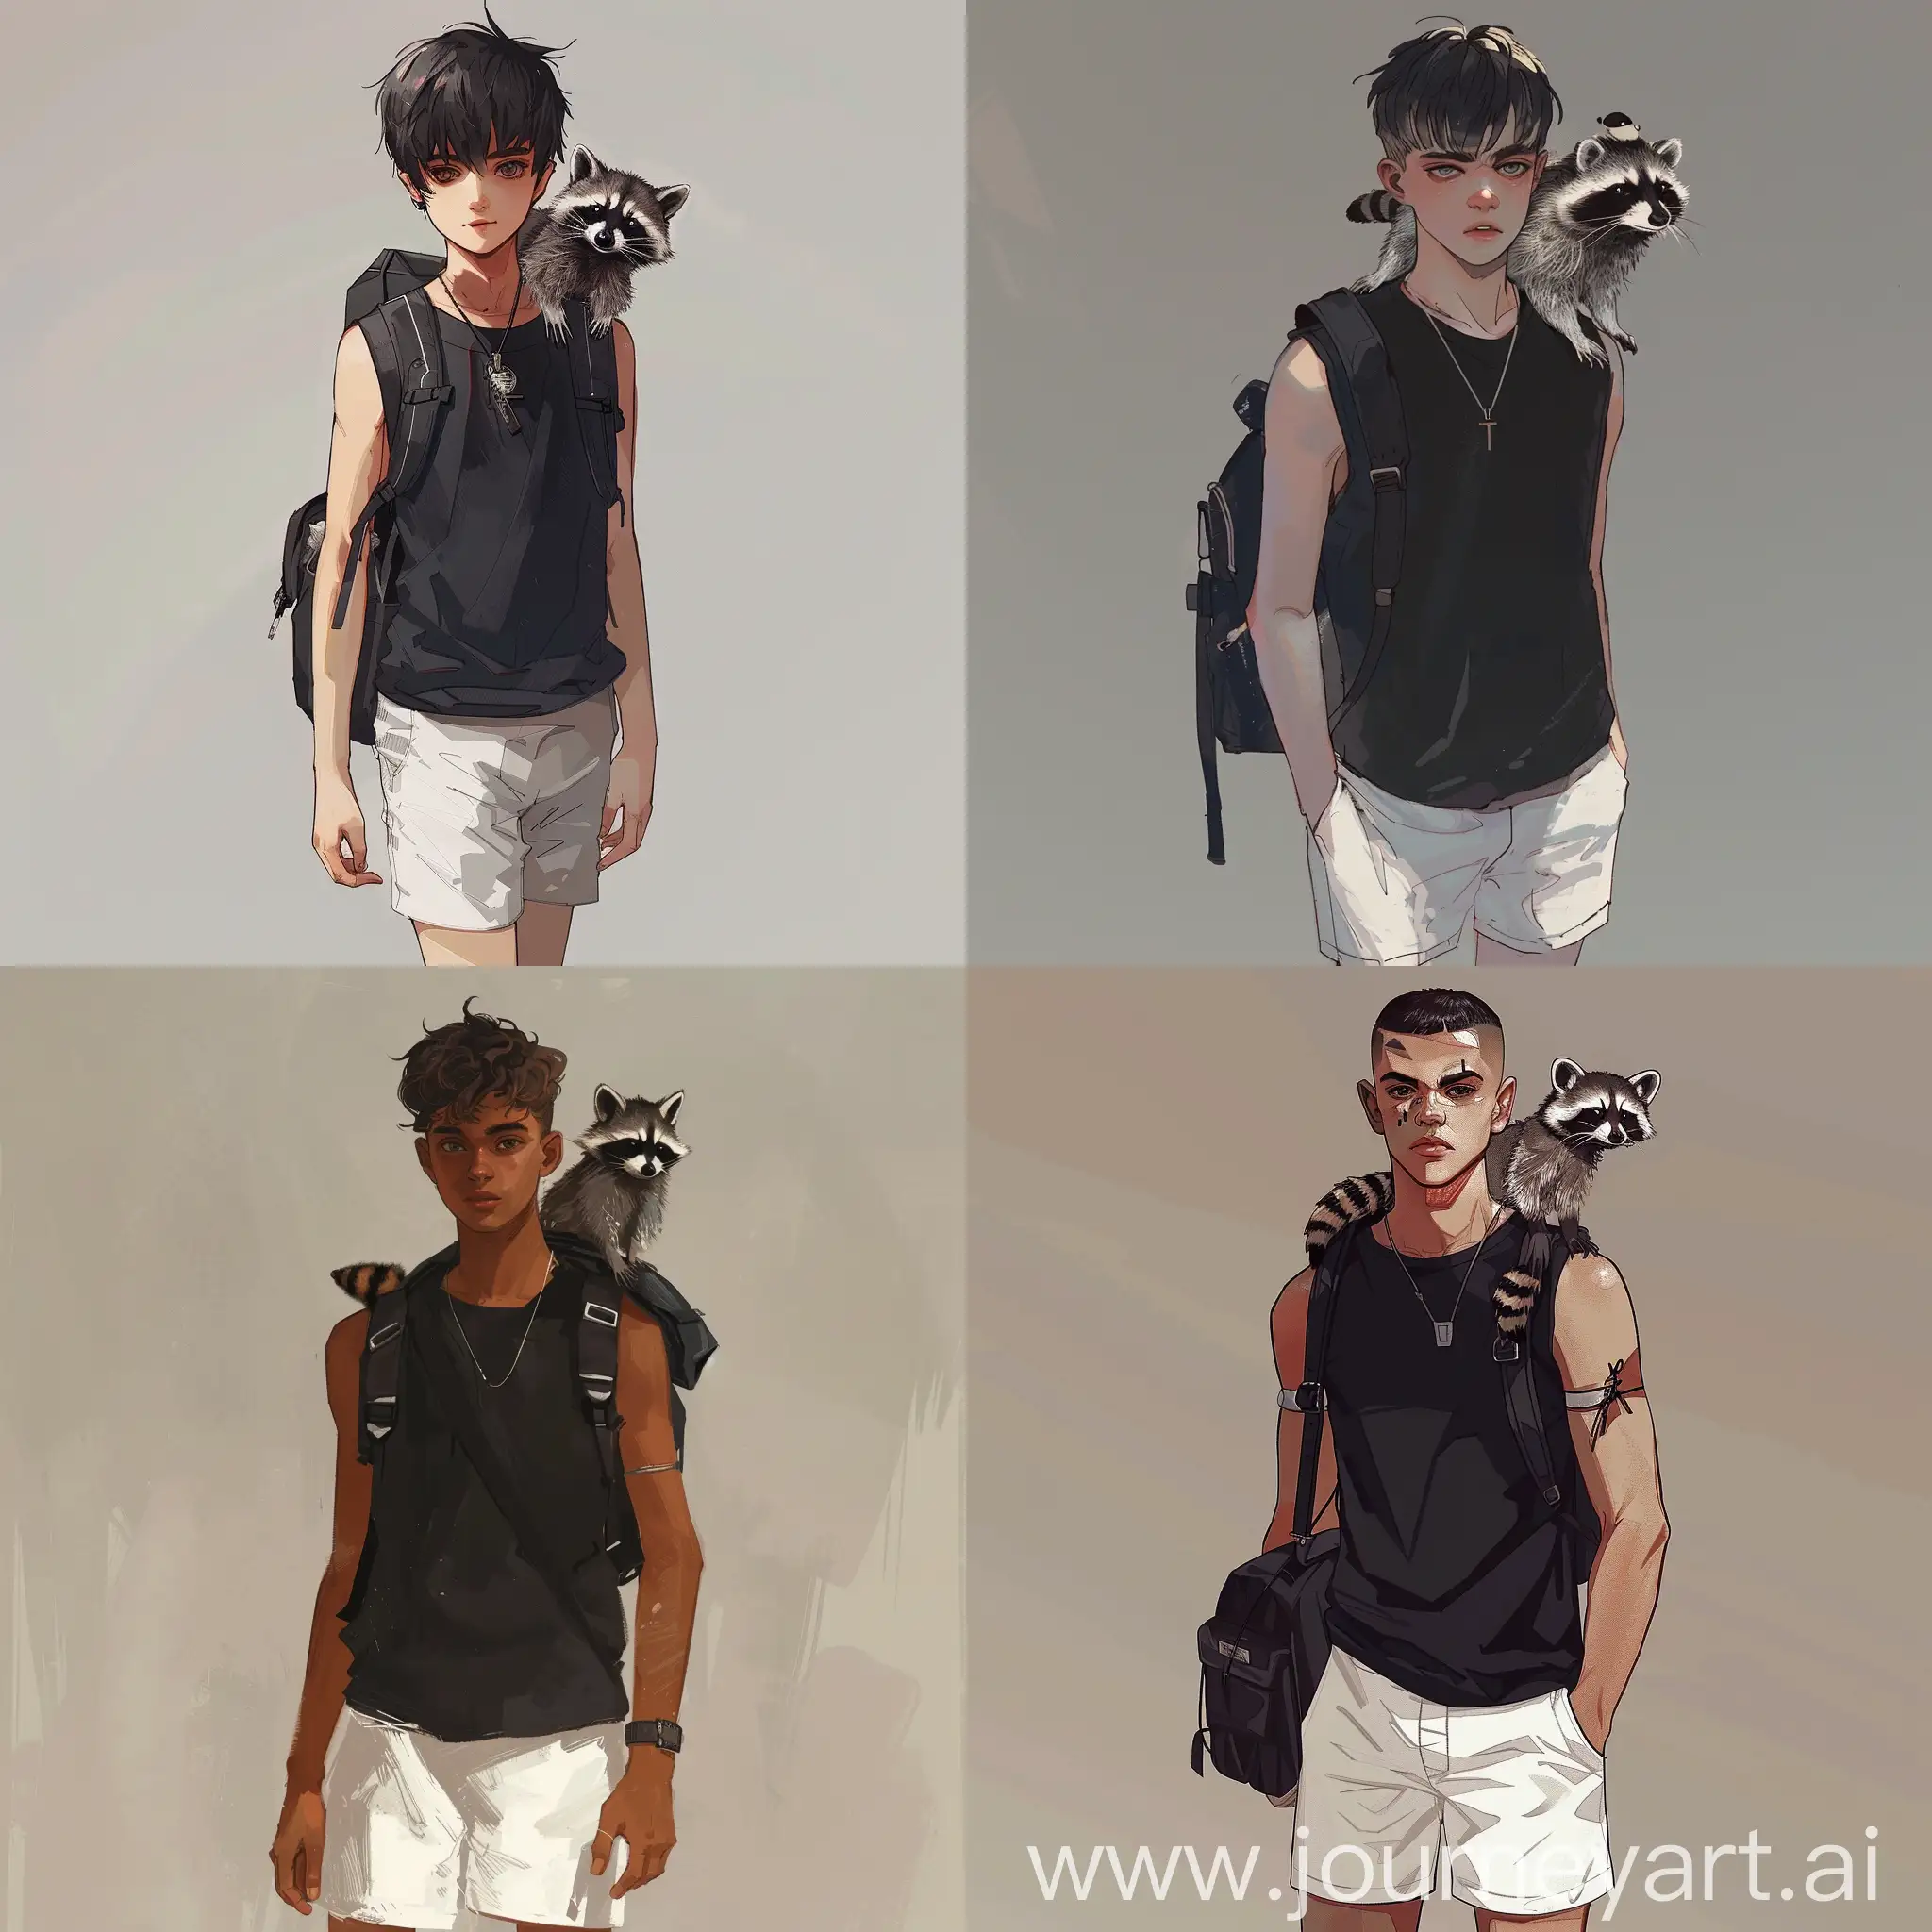 The image depicts a short-haired young man wearing a black sleeveless T-shirt and white shorts. He has a black single-strap backpack slung over one shoulder. Perched on his shoulder is a small raccoon.